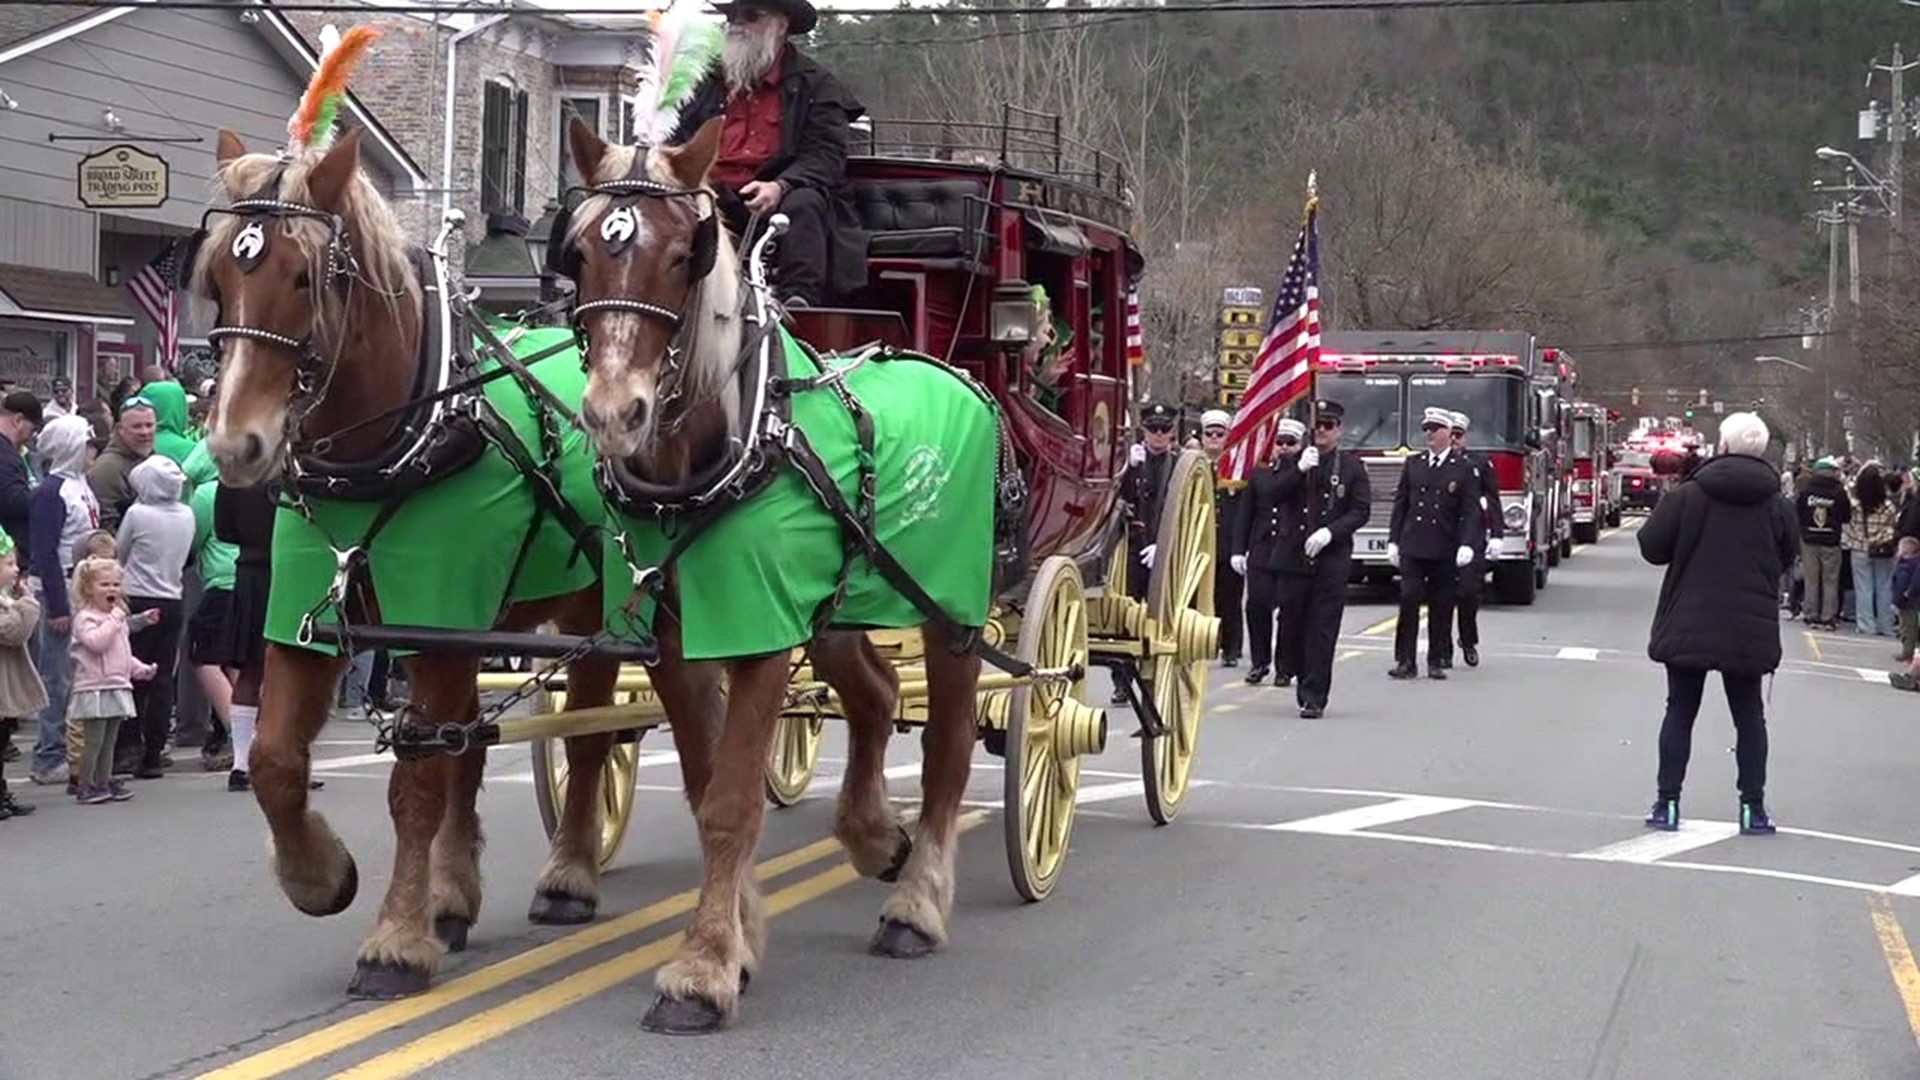 Folks in Pike County rang in St. Patrick's Day with their first parade.